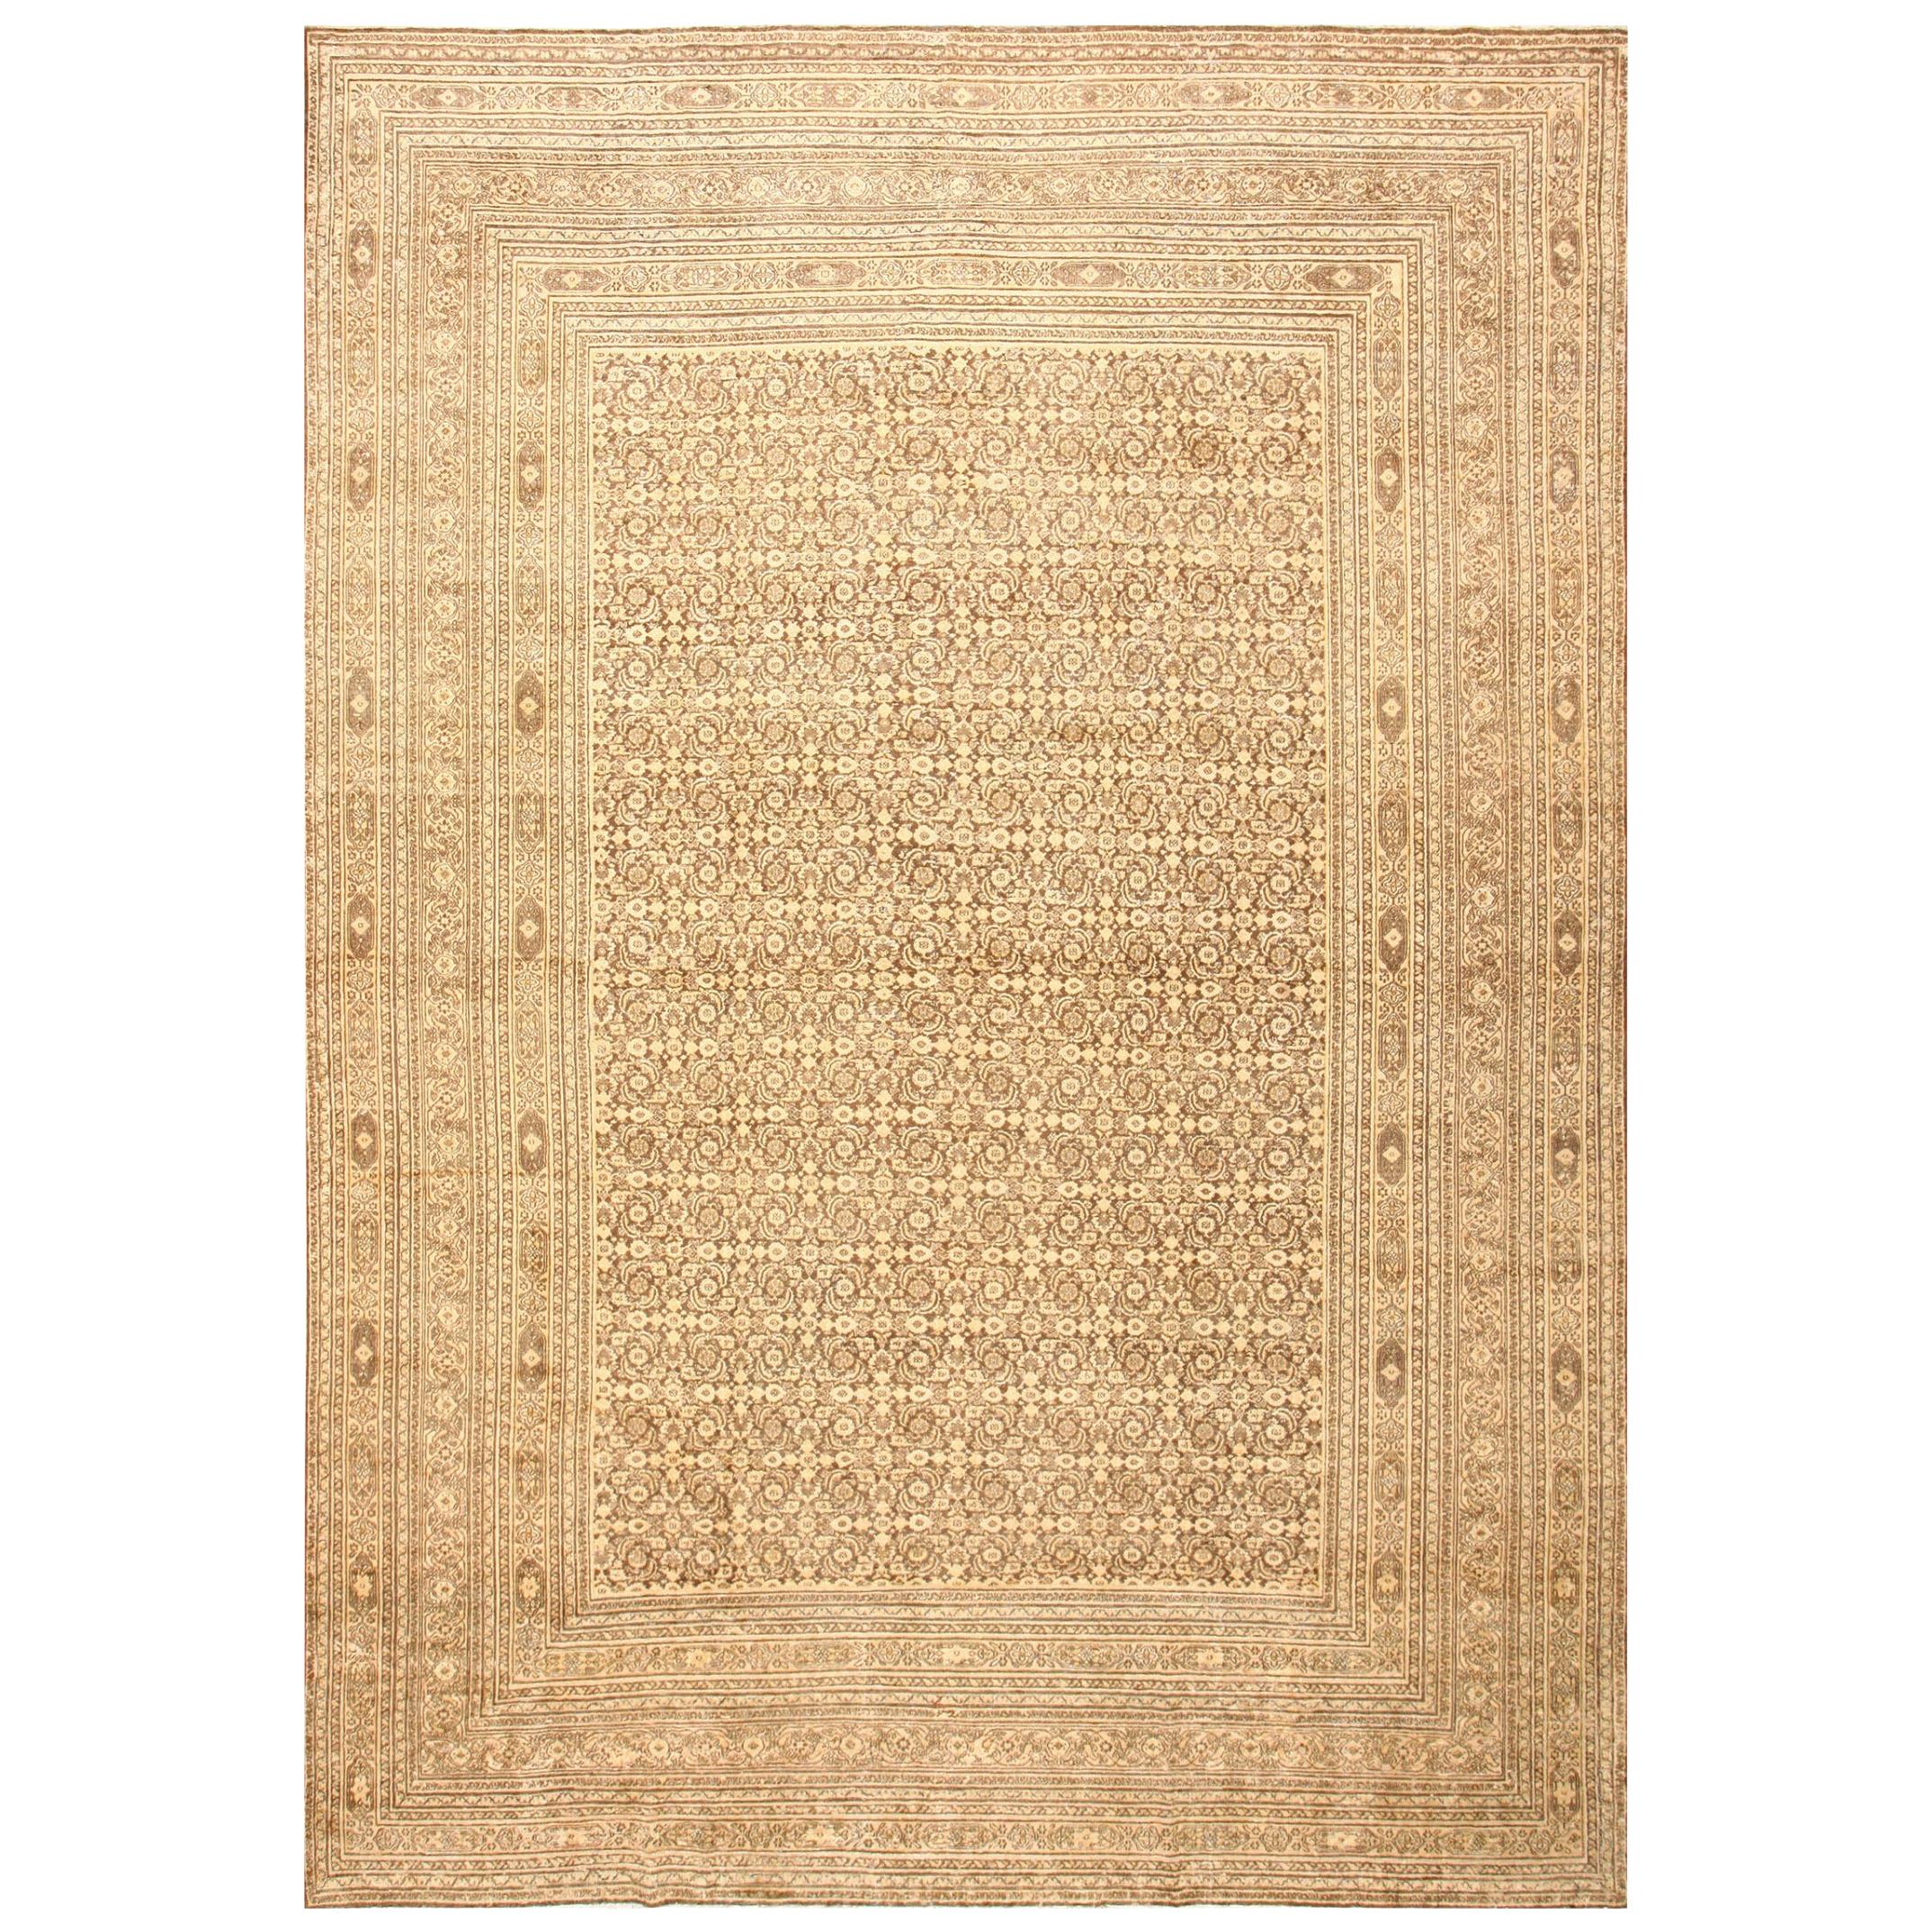 Nazmiyal Collection Antique Persian Khorassan Rug. Size: 11 ft 3 in x 16 ft 3 in